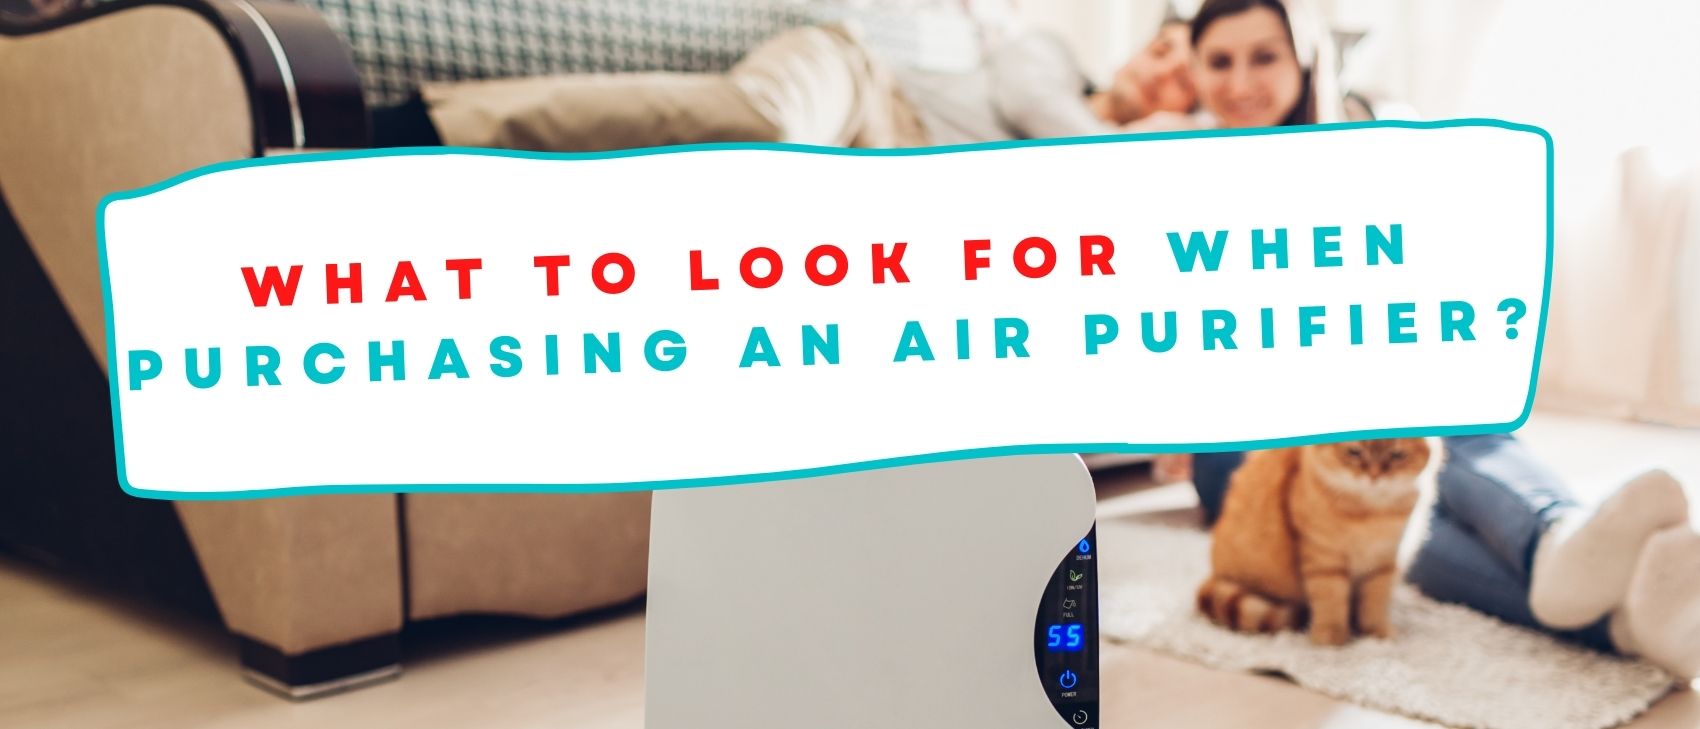 What to Look for When Purchasing an Air Purifier?